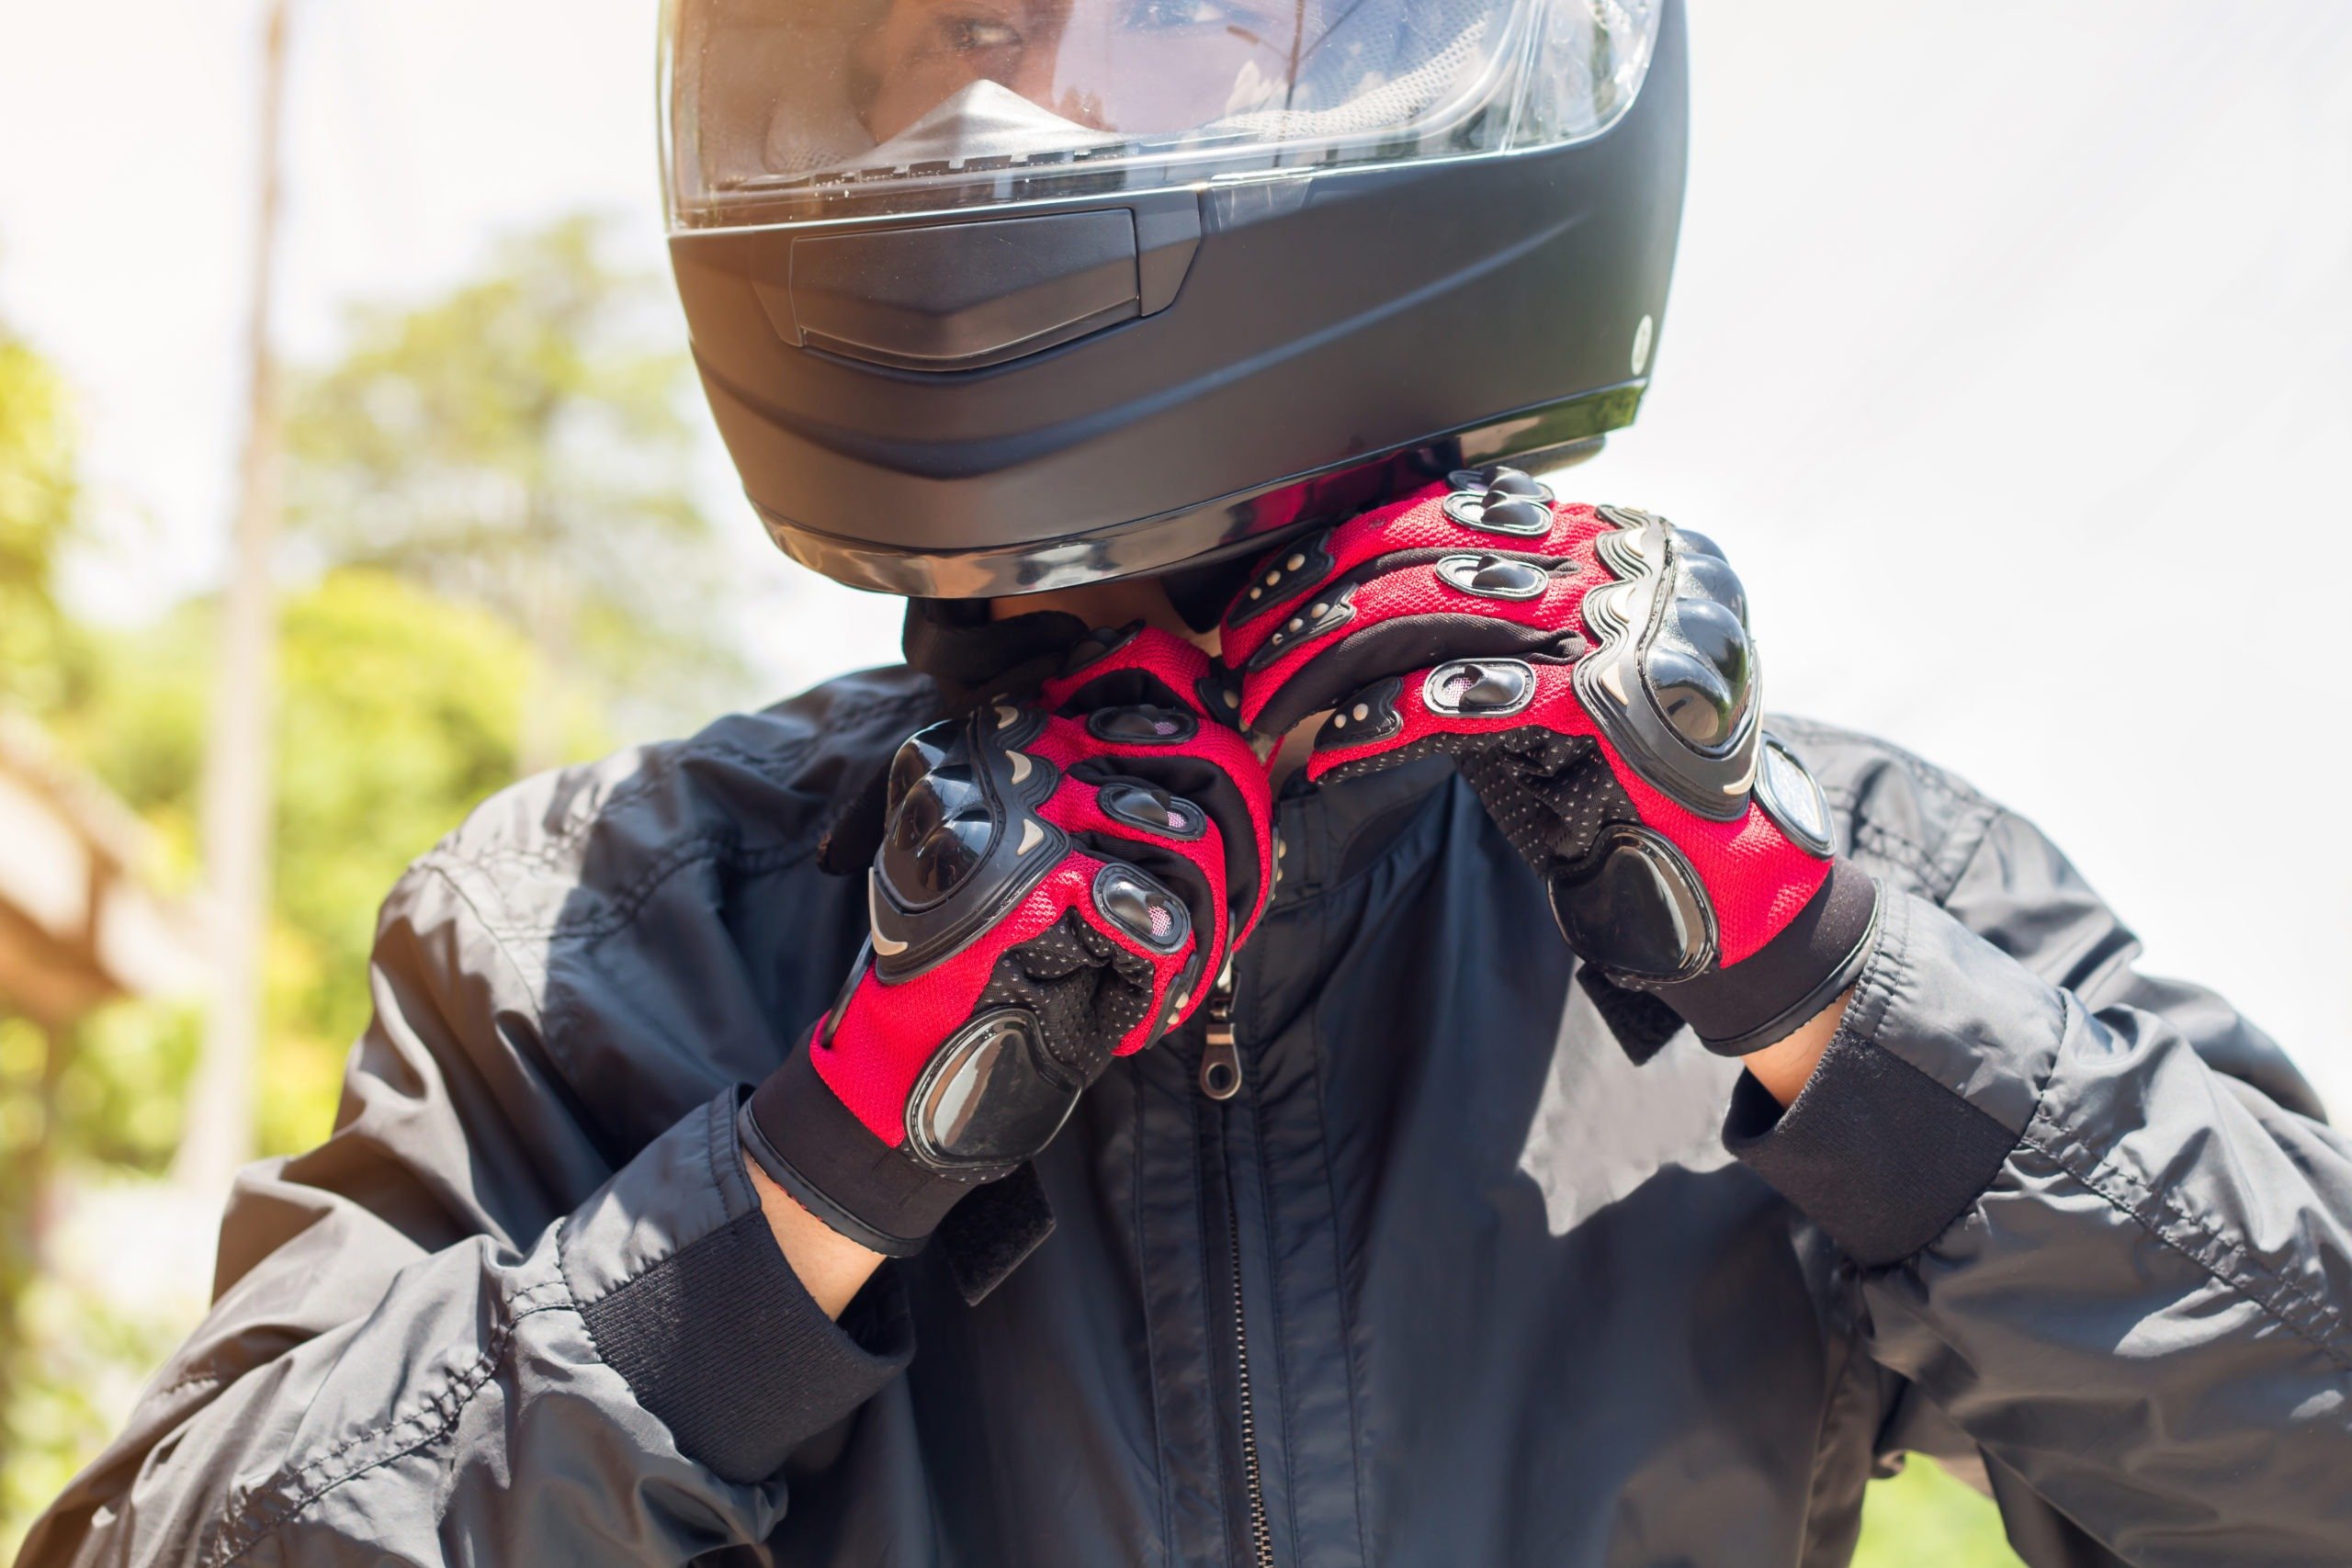 Motorcycle Safety Gear You Can't be Without